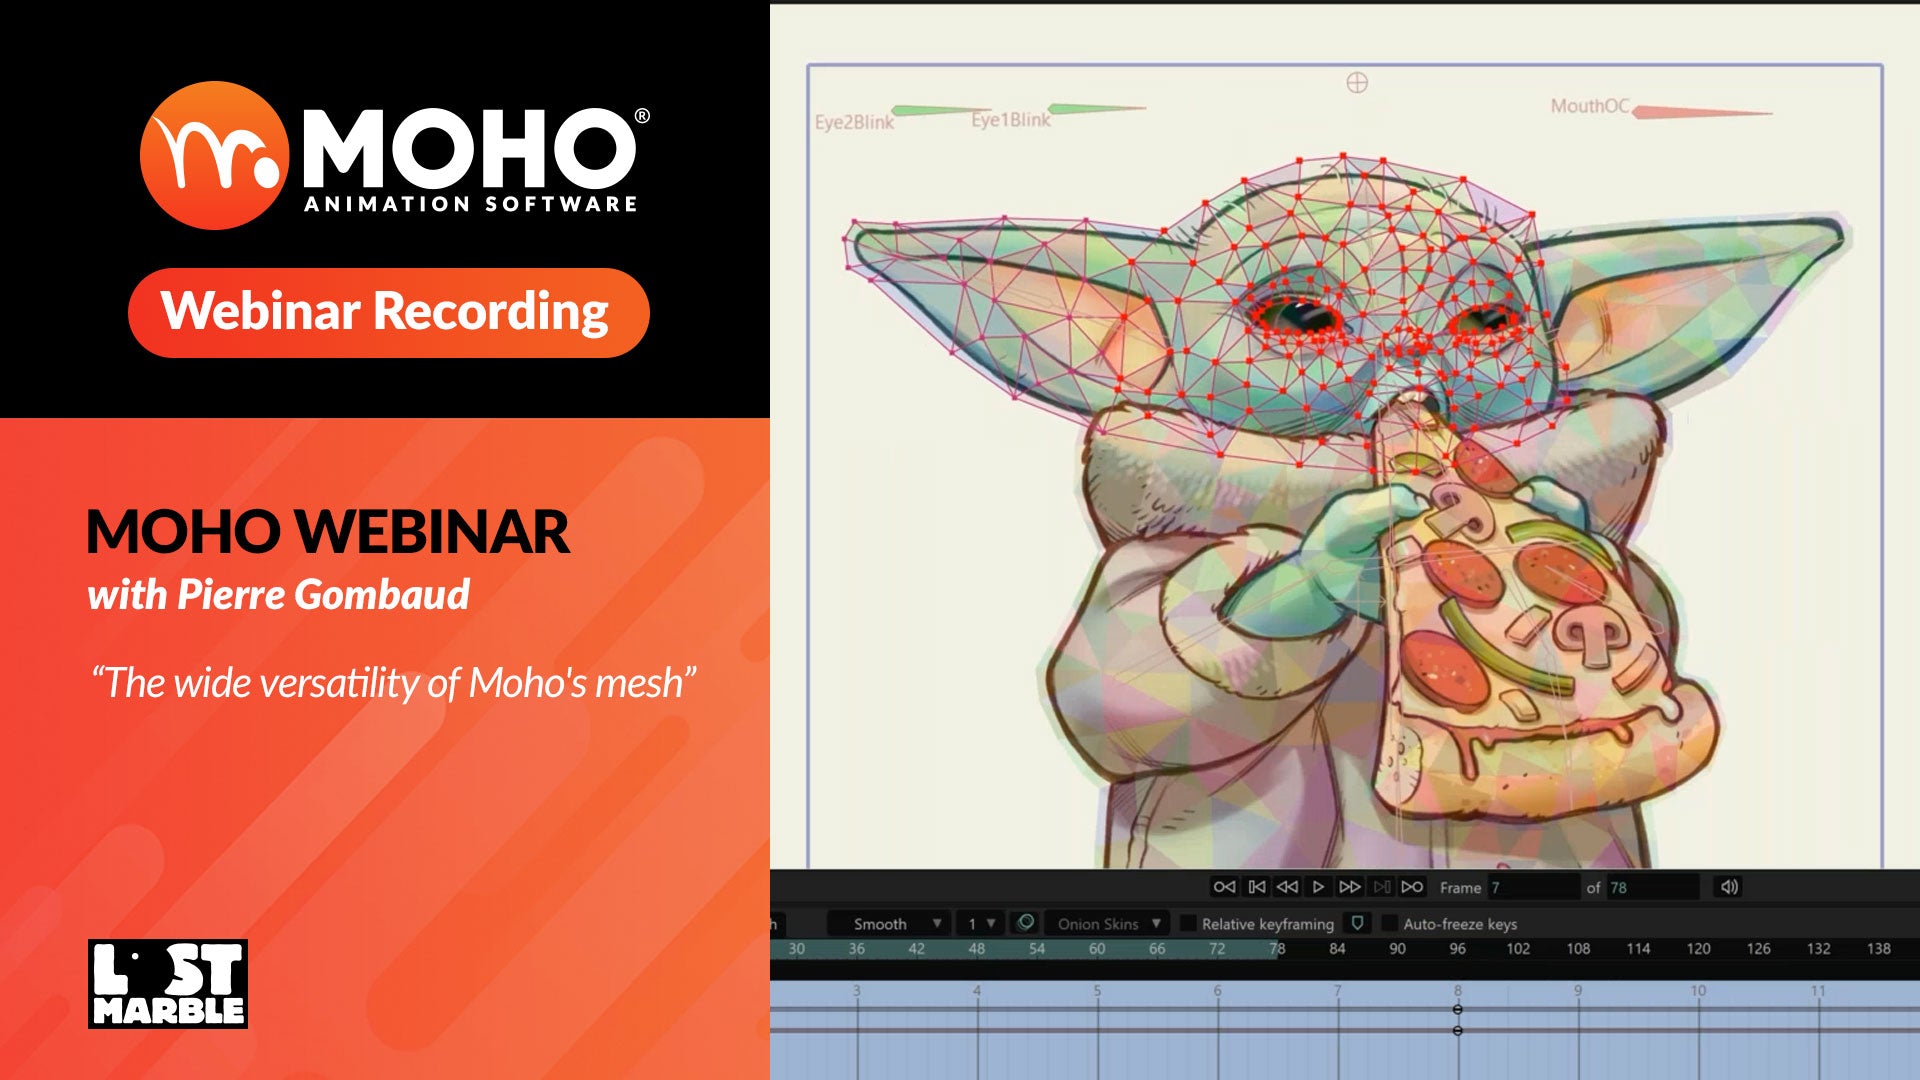 Webinar recording: 'The wide versatility of Moho's mesh' with Pierre Gombaud